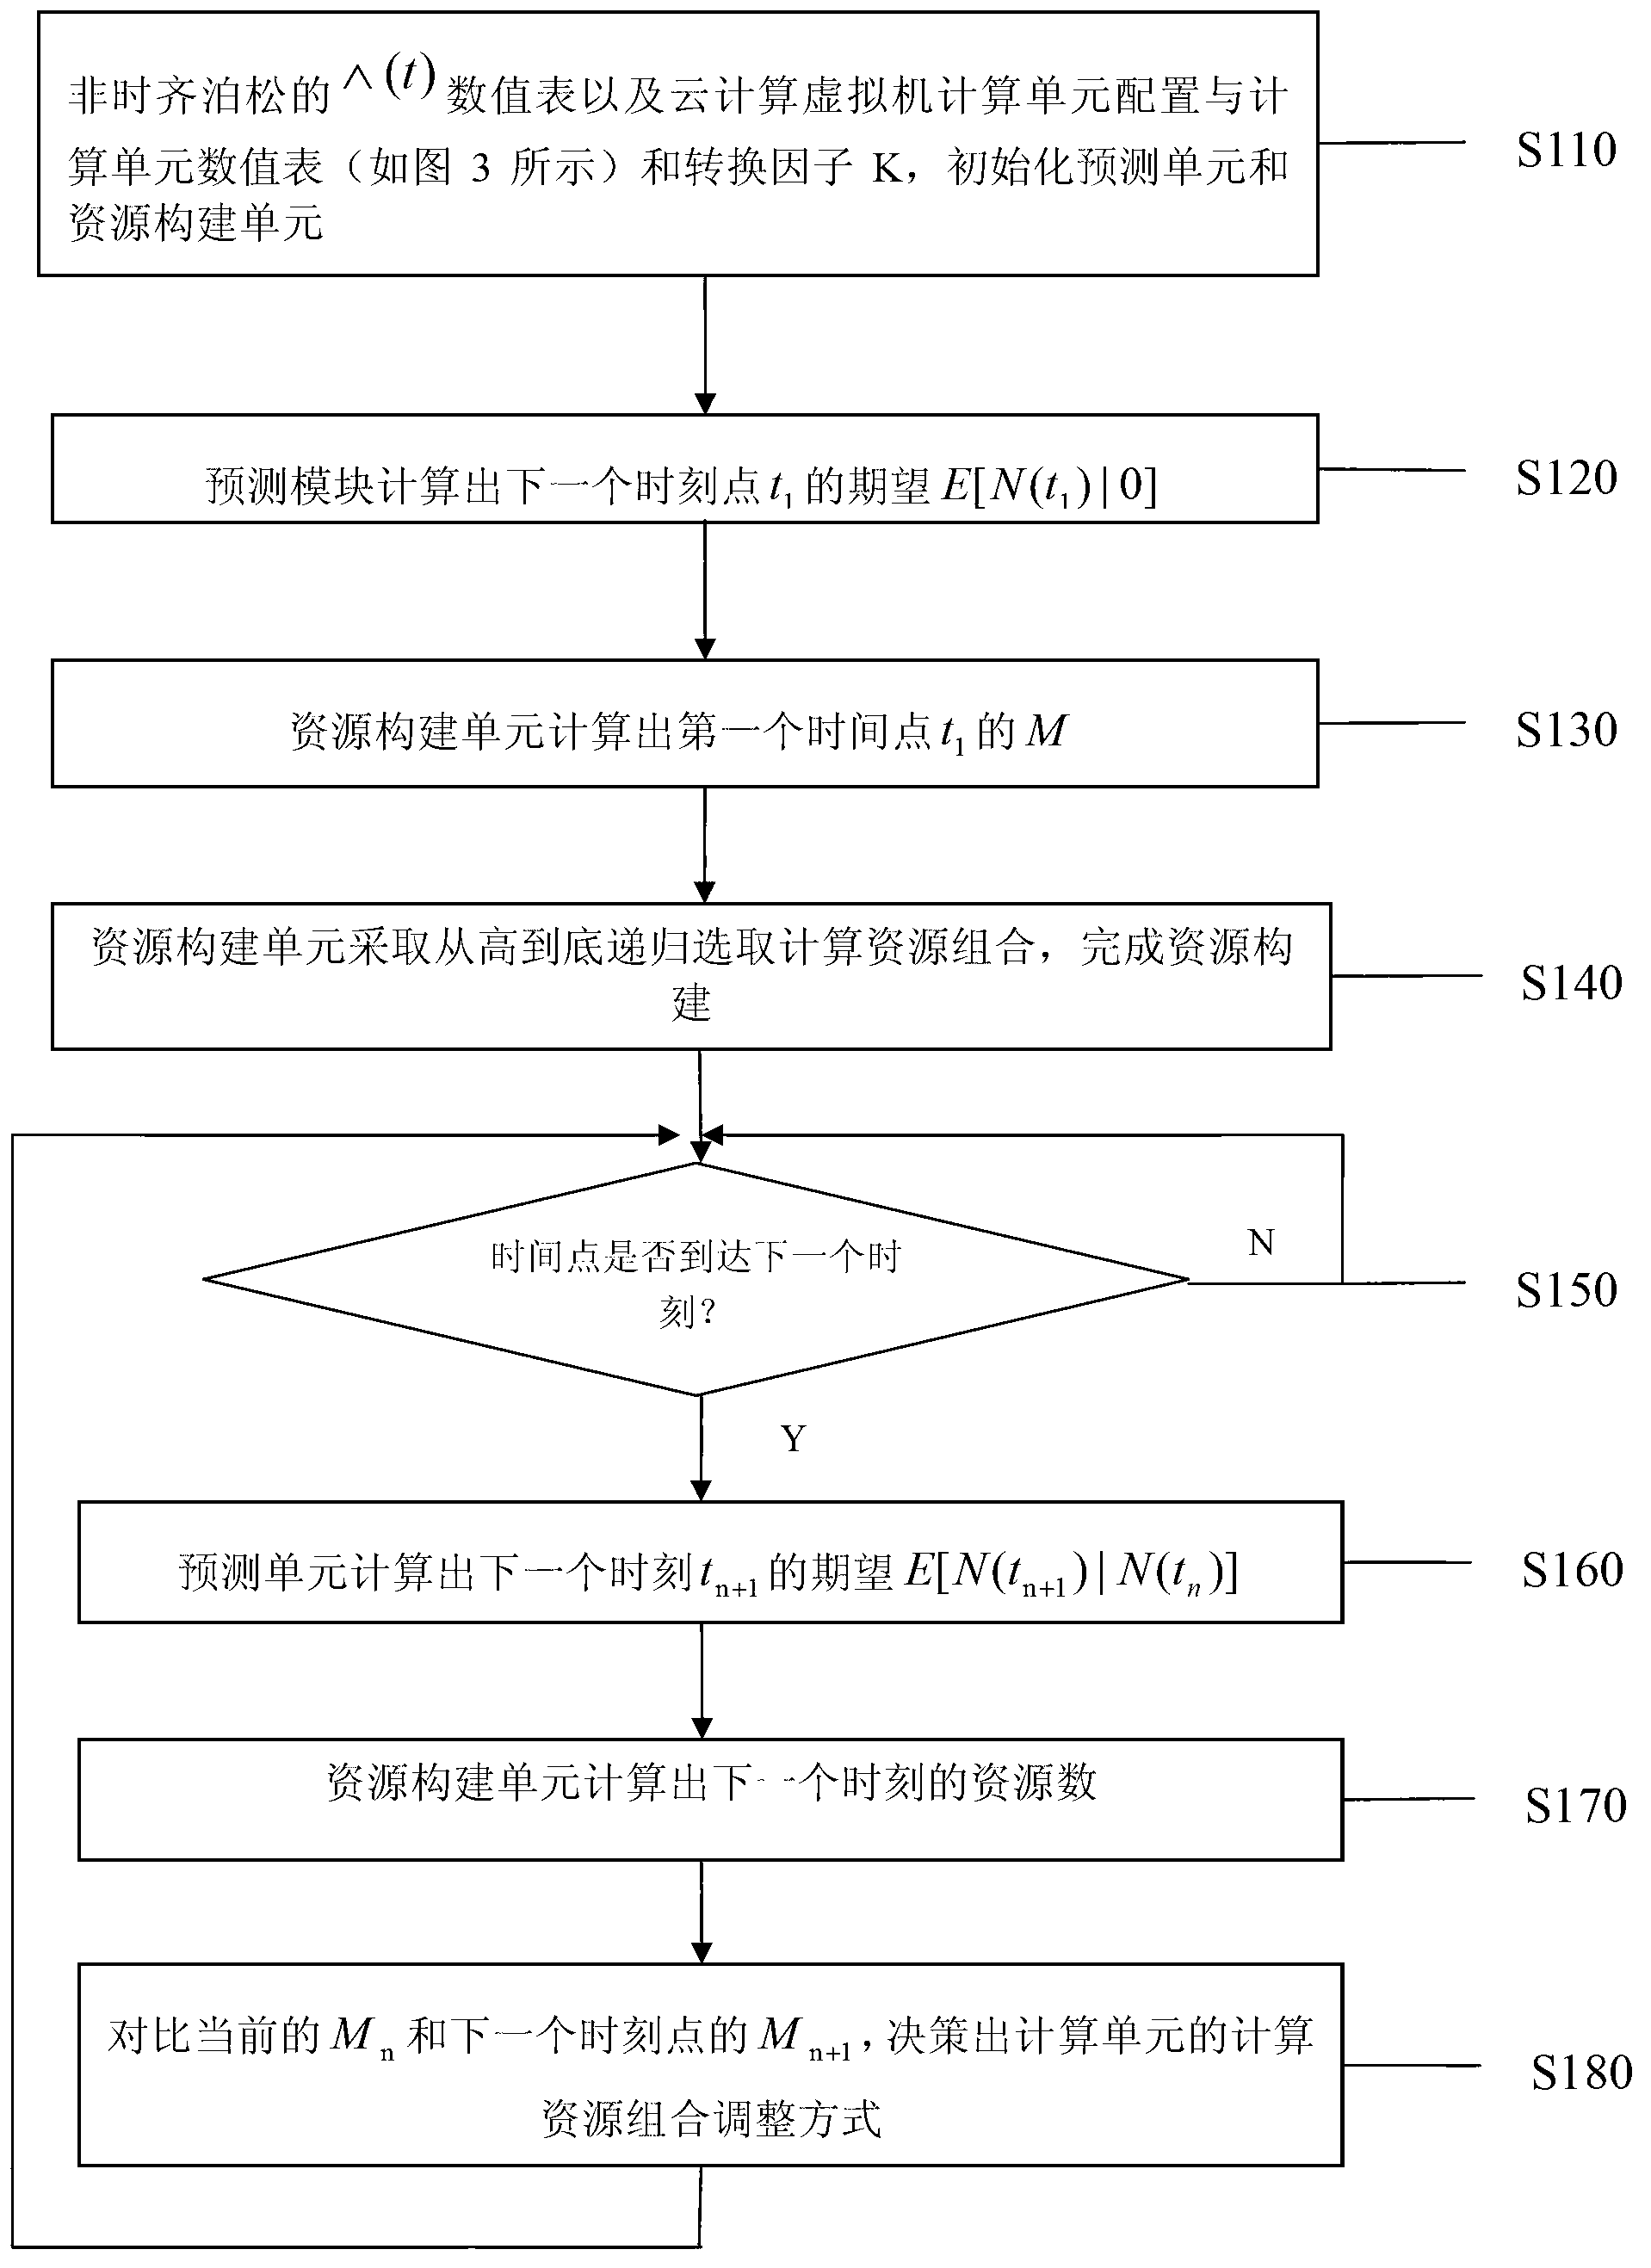 Elastic resource forecasting and building method for cloud computing